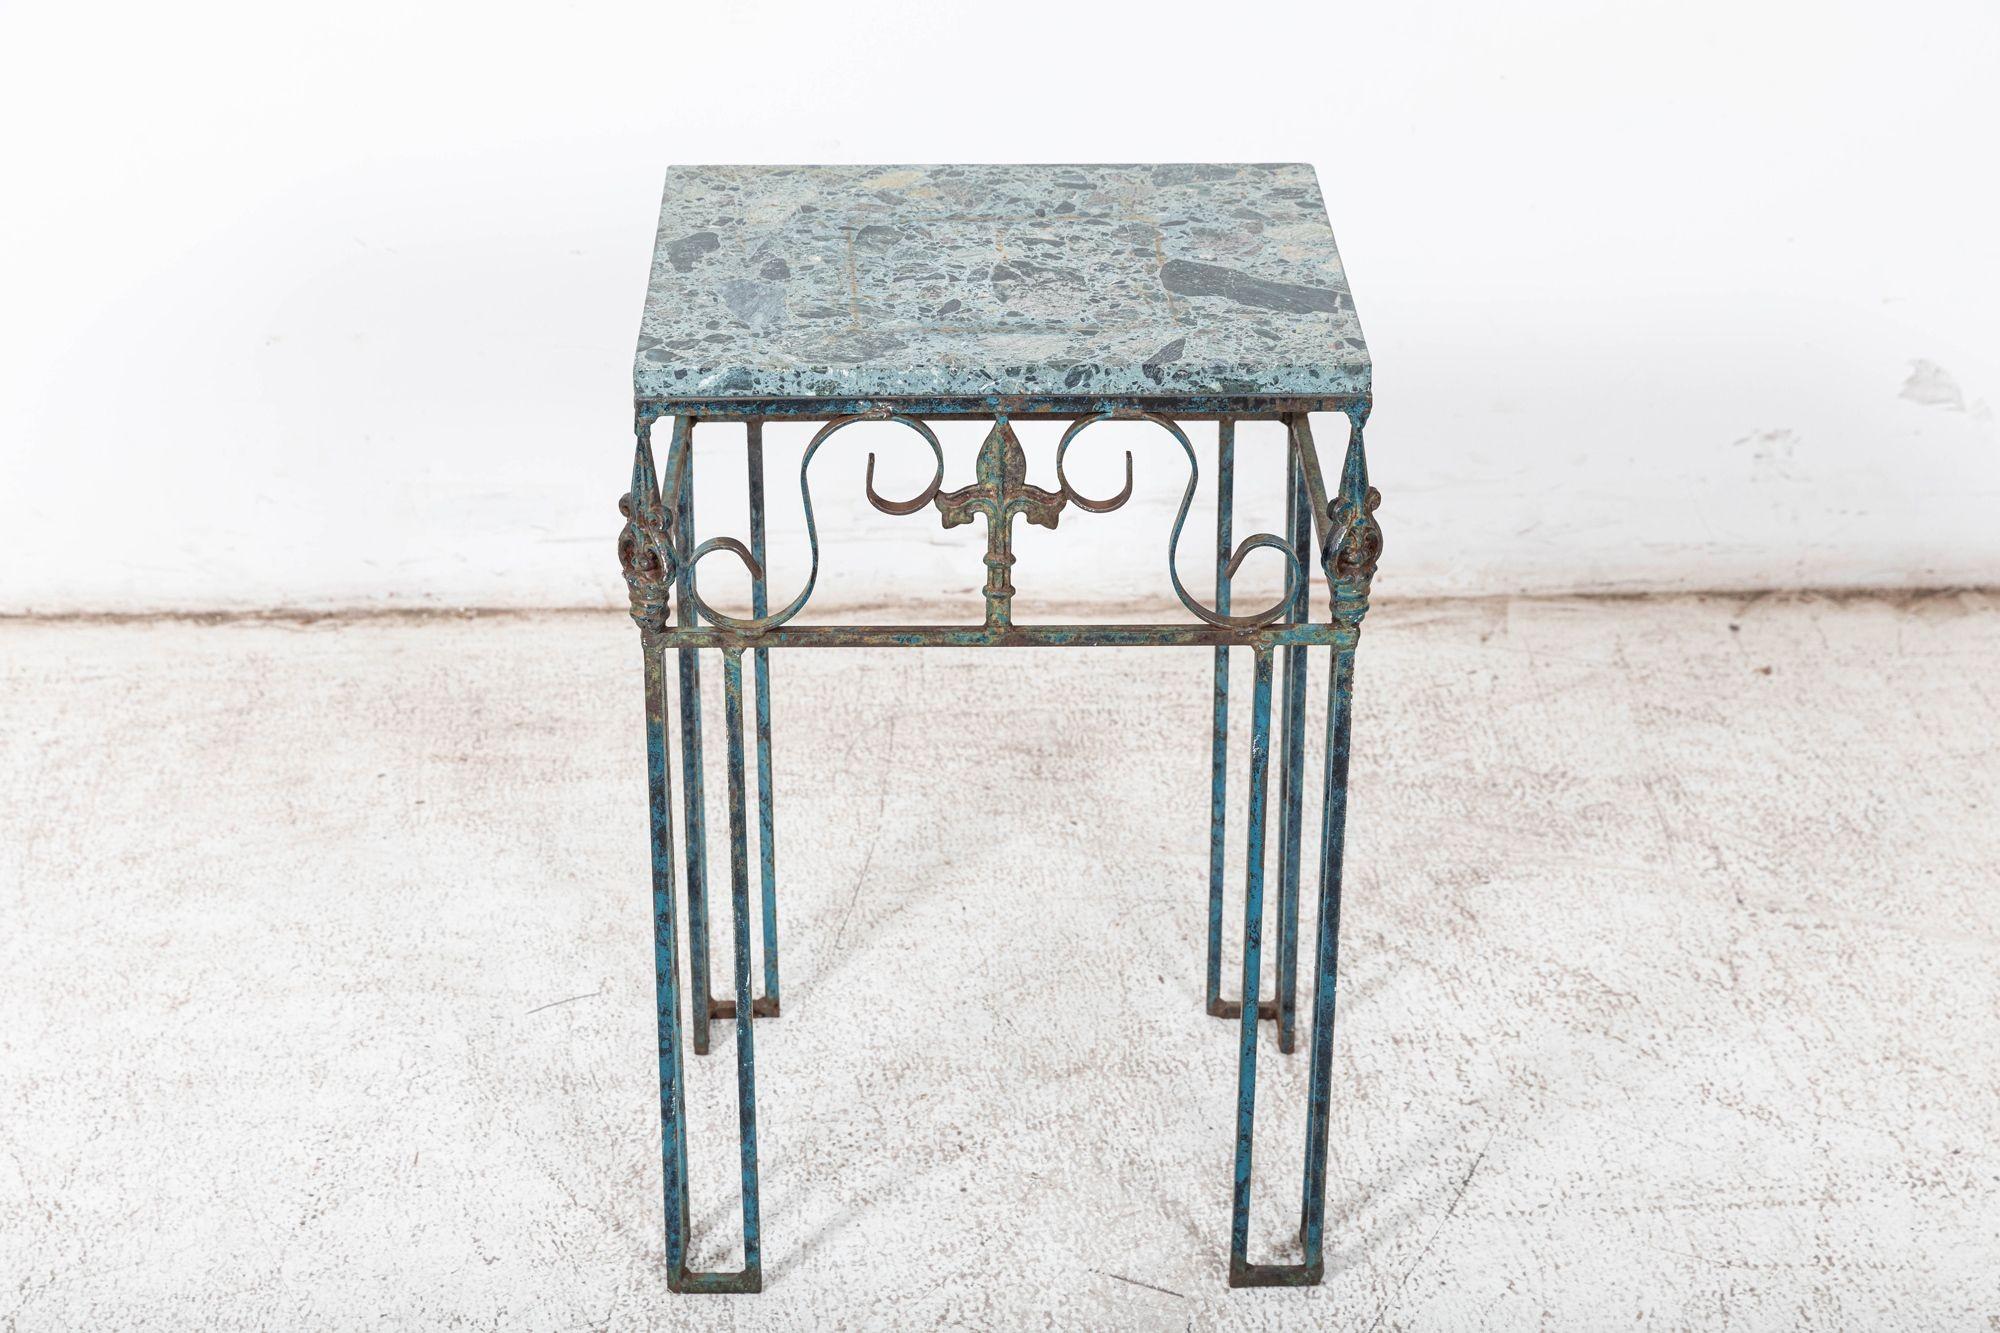 circa 1900
French Marble & Iron Side Table in original paint
sku 1083
W43 x D36 x H66 cm